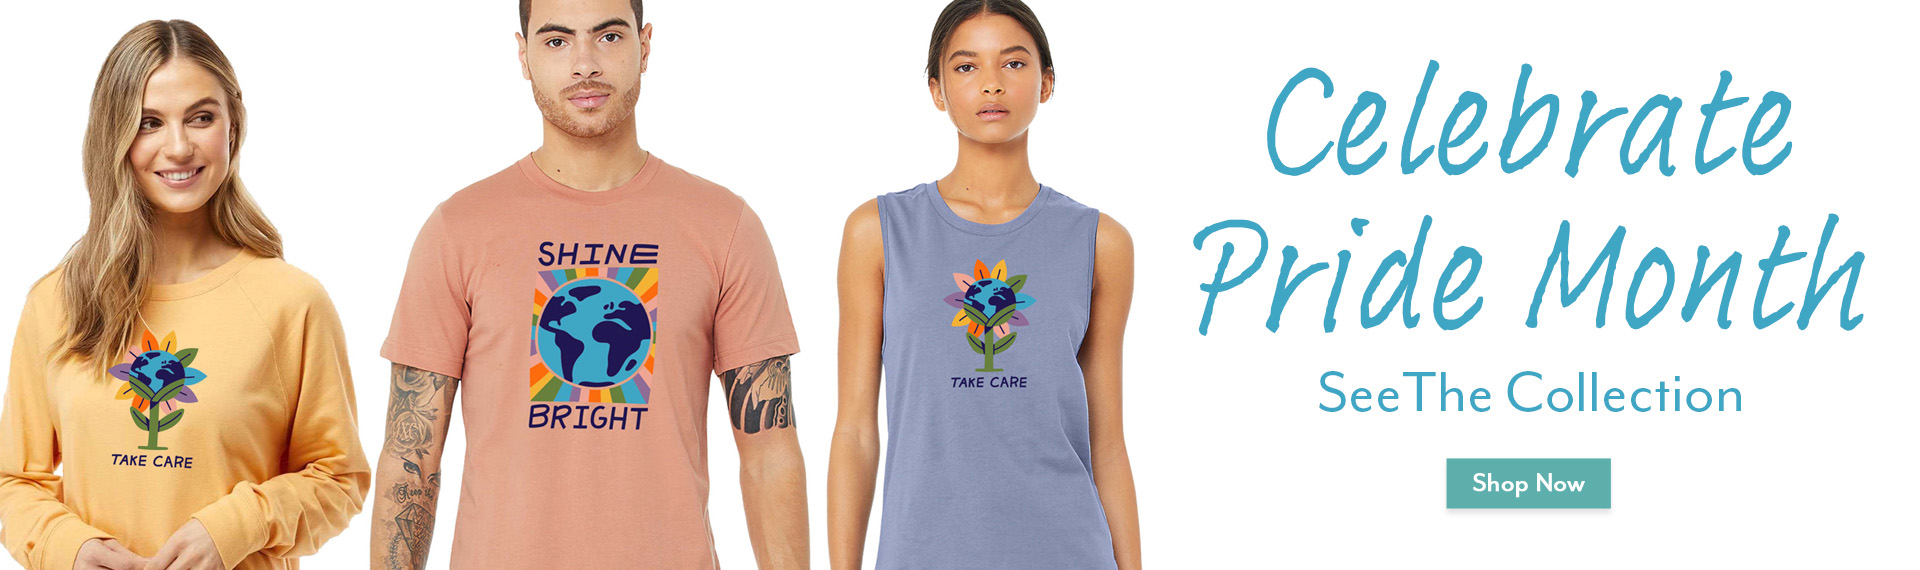 June Gay Pride Month Collection